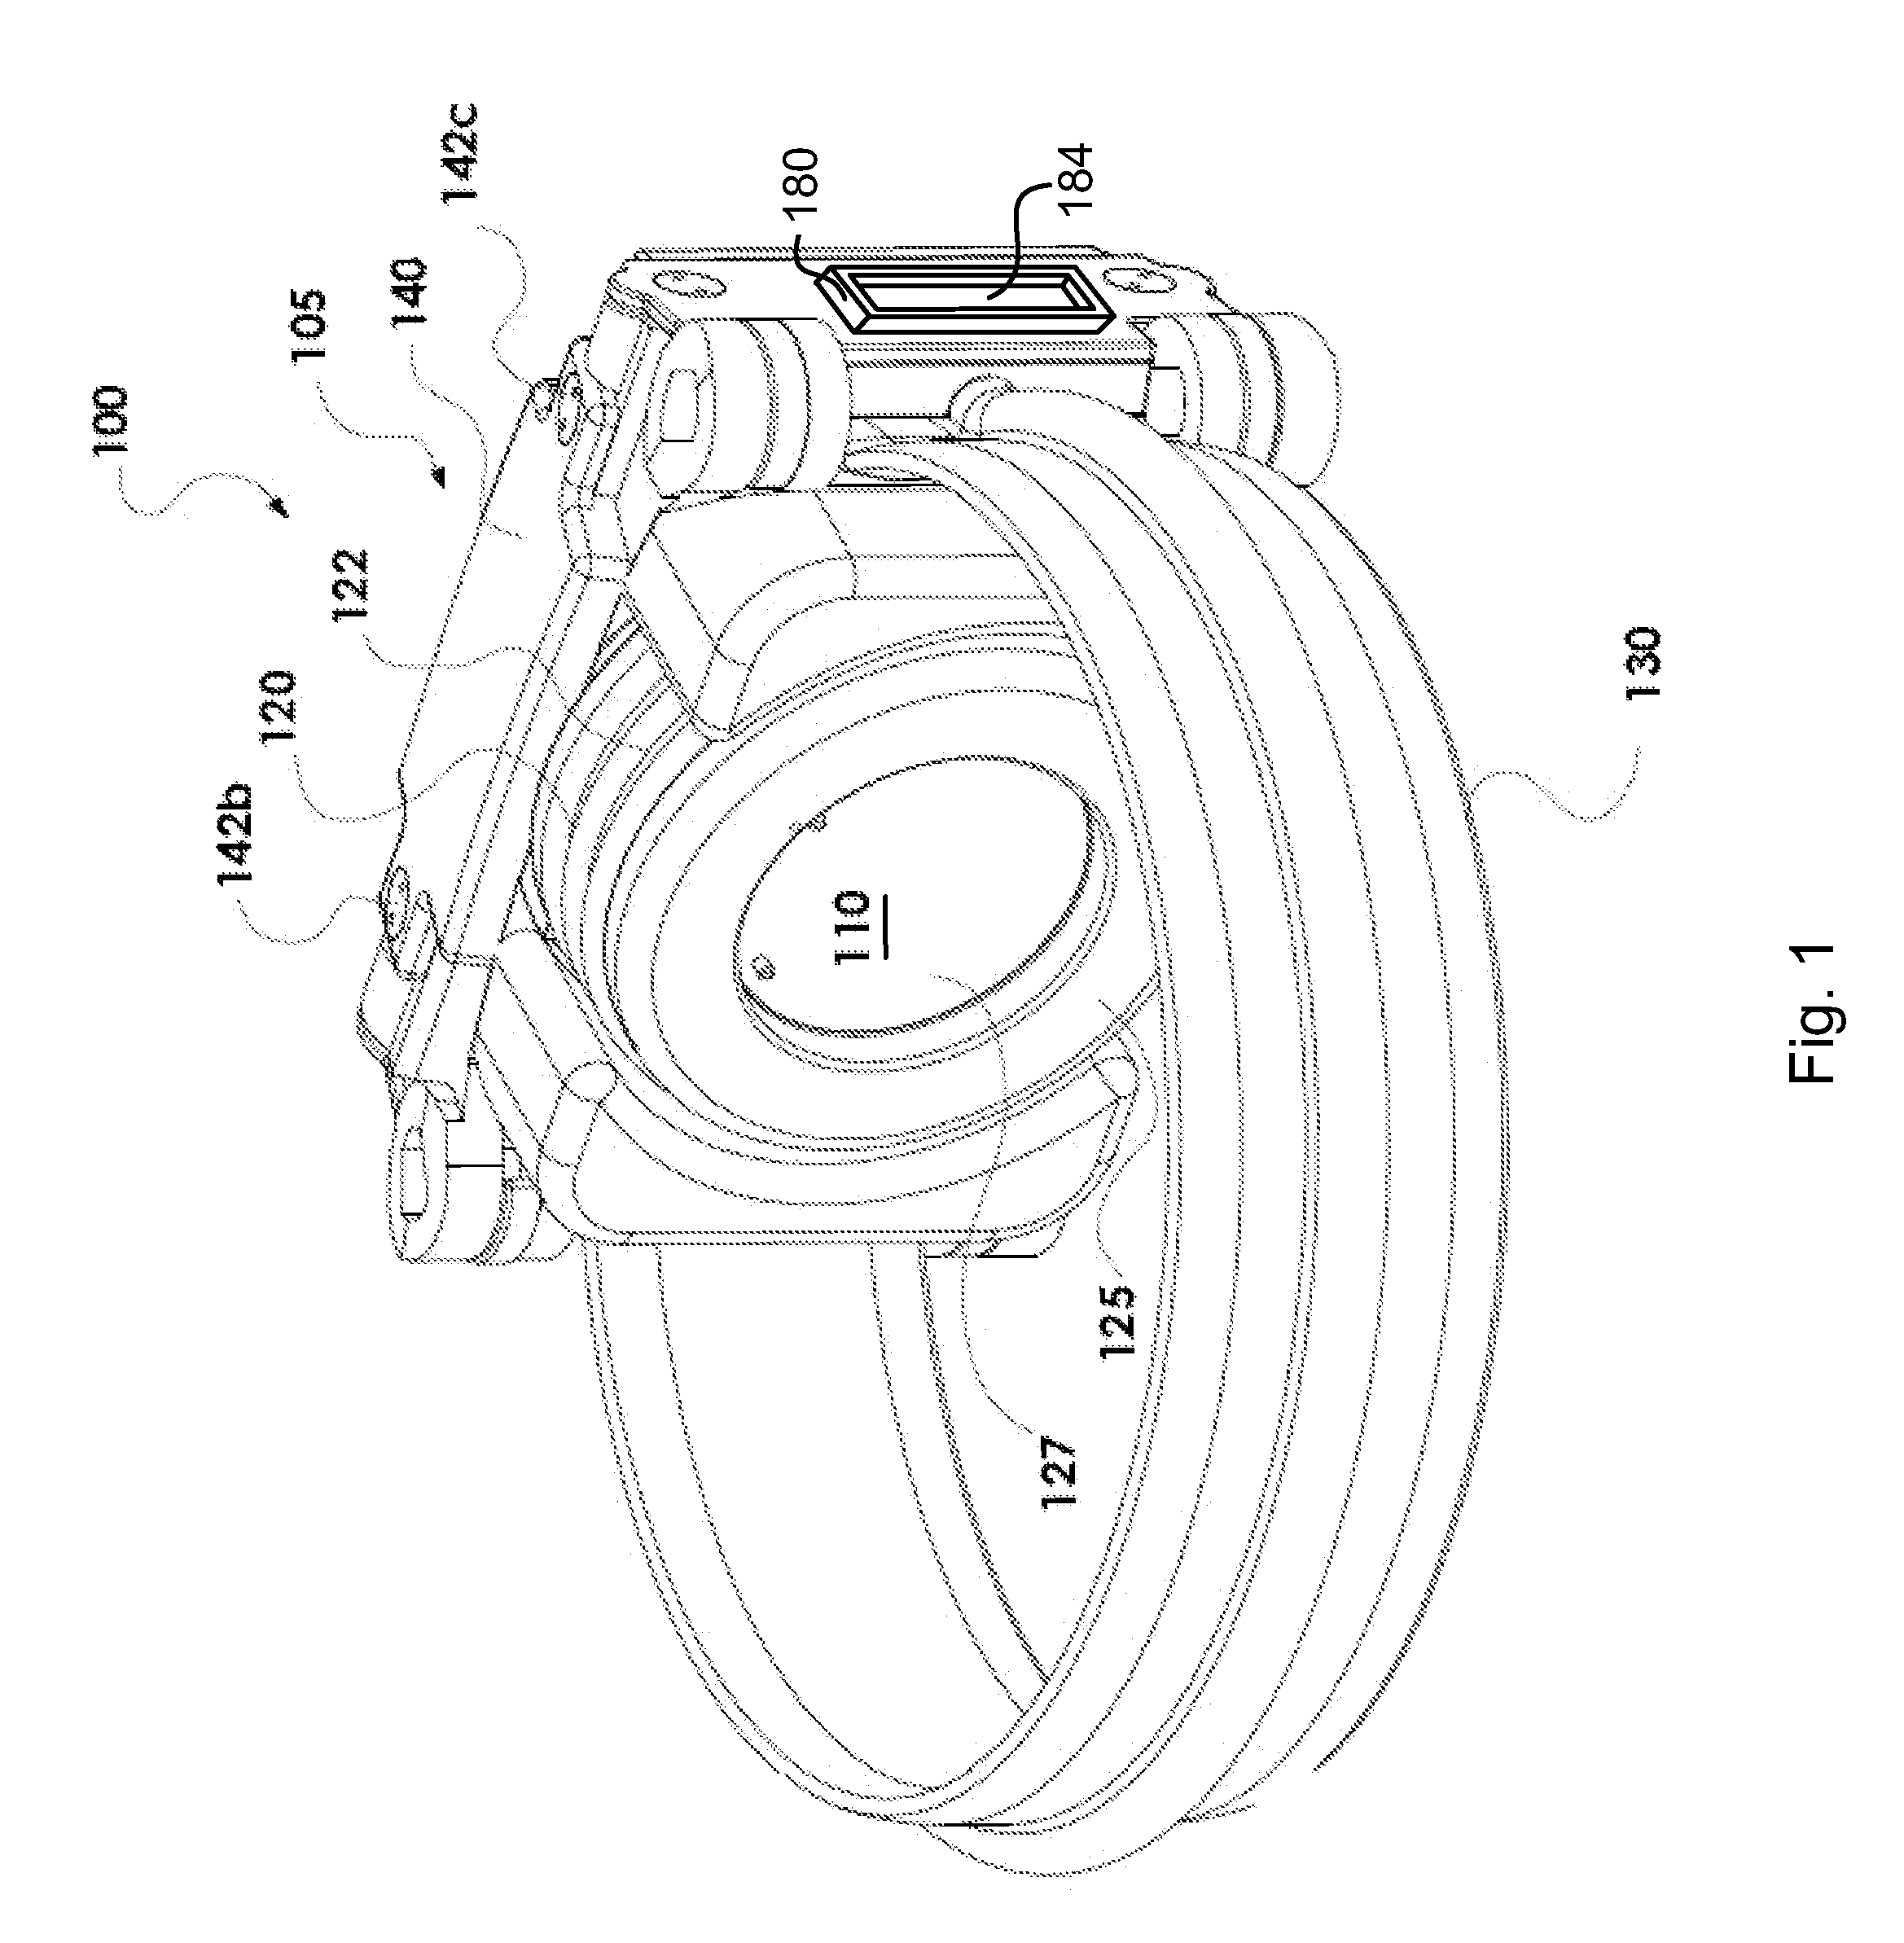 Systems and methods for alcohol consumption monitoring